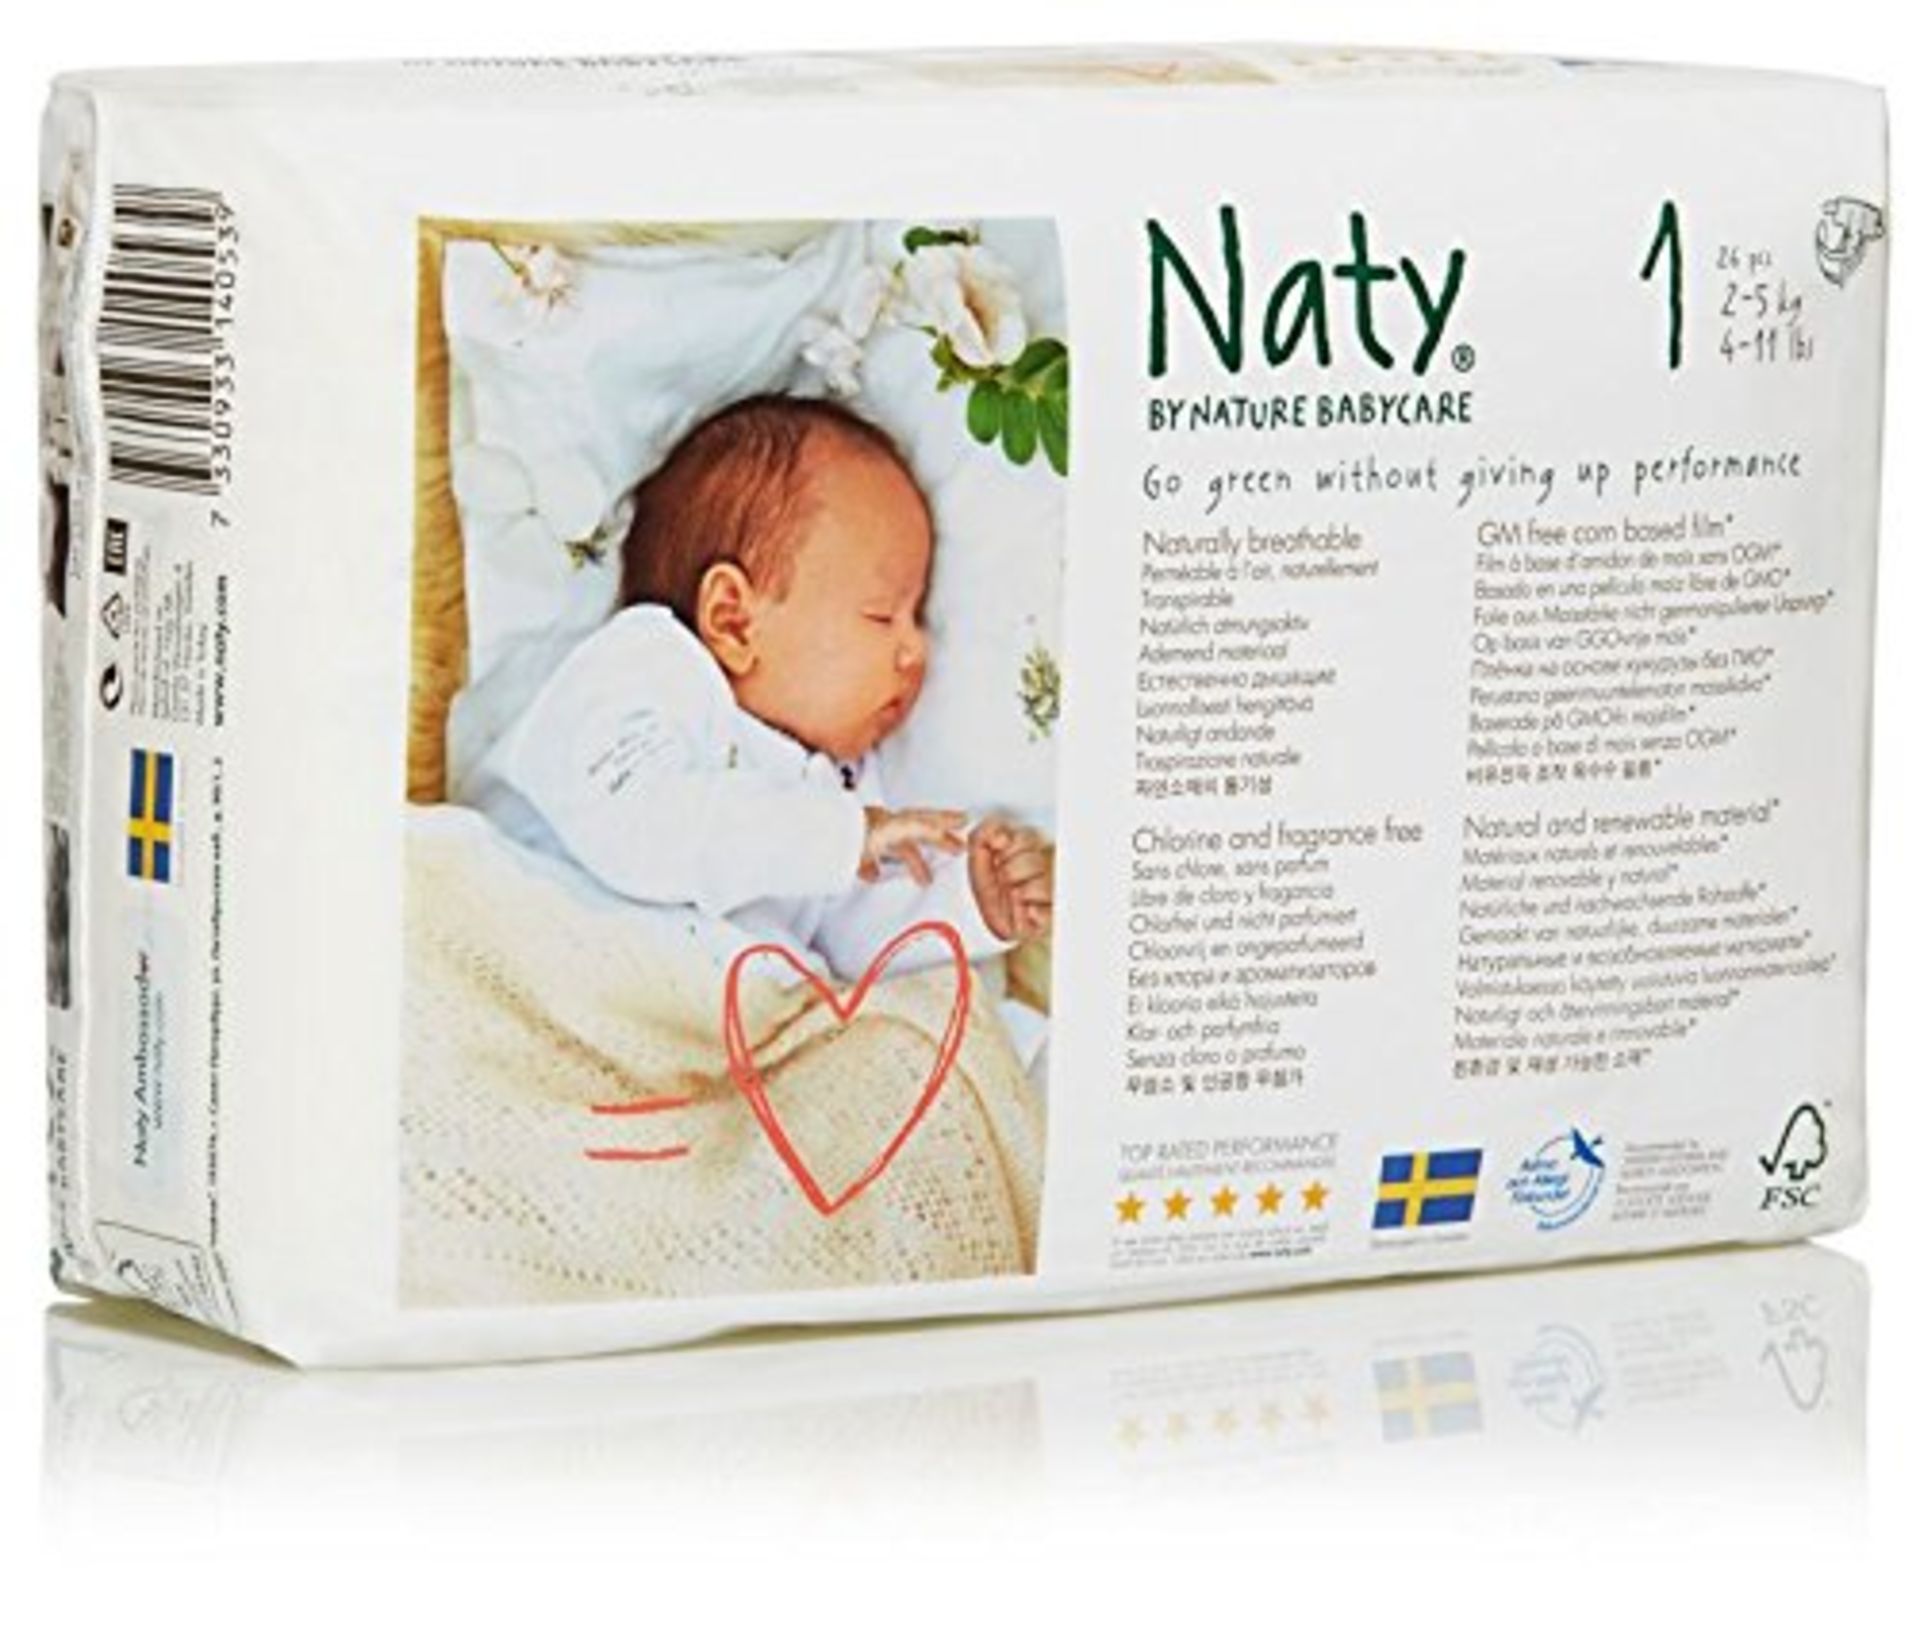 1 Box of 6 units , Containing Baby Products - Box Number 'BABY 305' - Latest AMZ price £84.88 - - Image 3 of 4